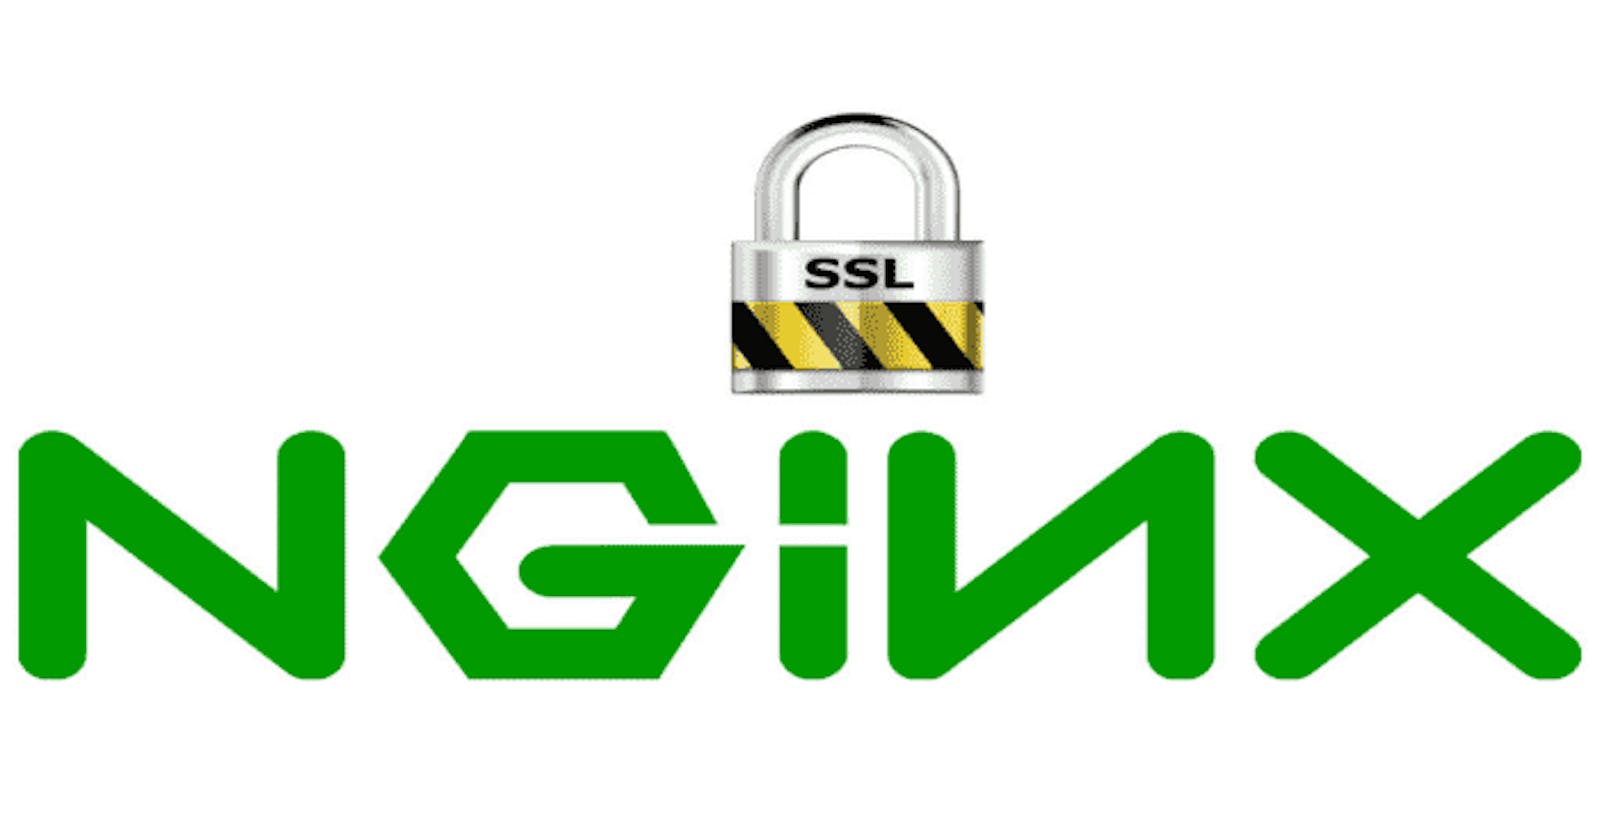 Configuring Nginx and Installing SSL certificate from Certbot on Ubuntu